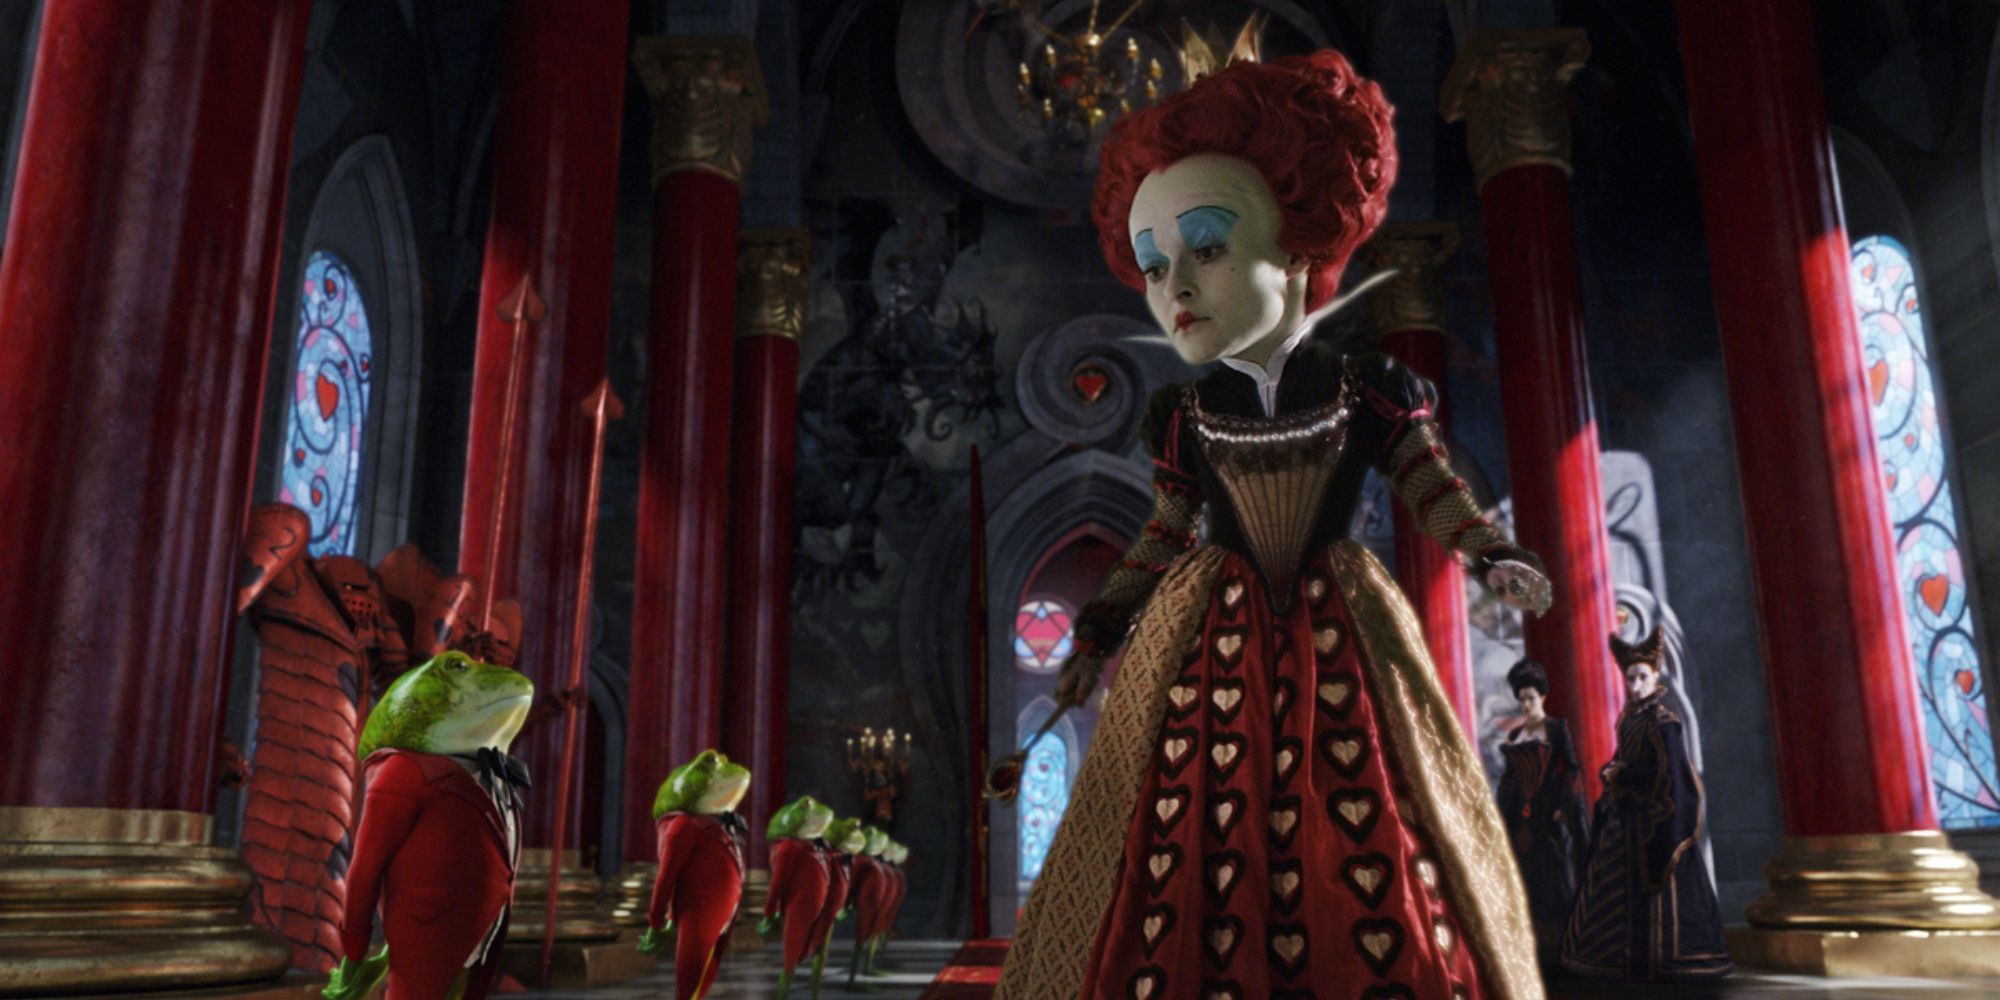 The Red Queen interrogating a frog in Alice in Wonderland.